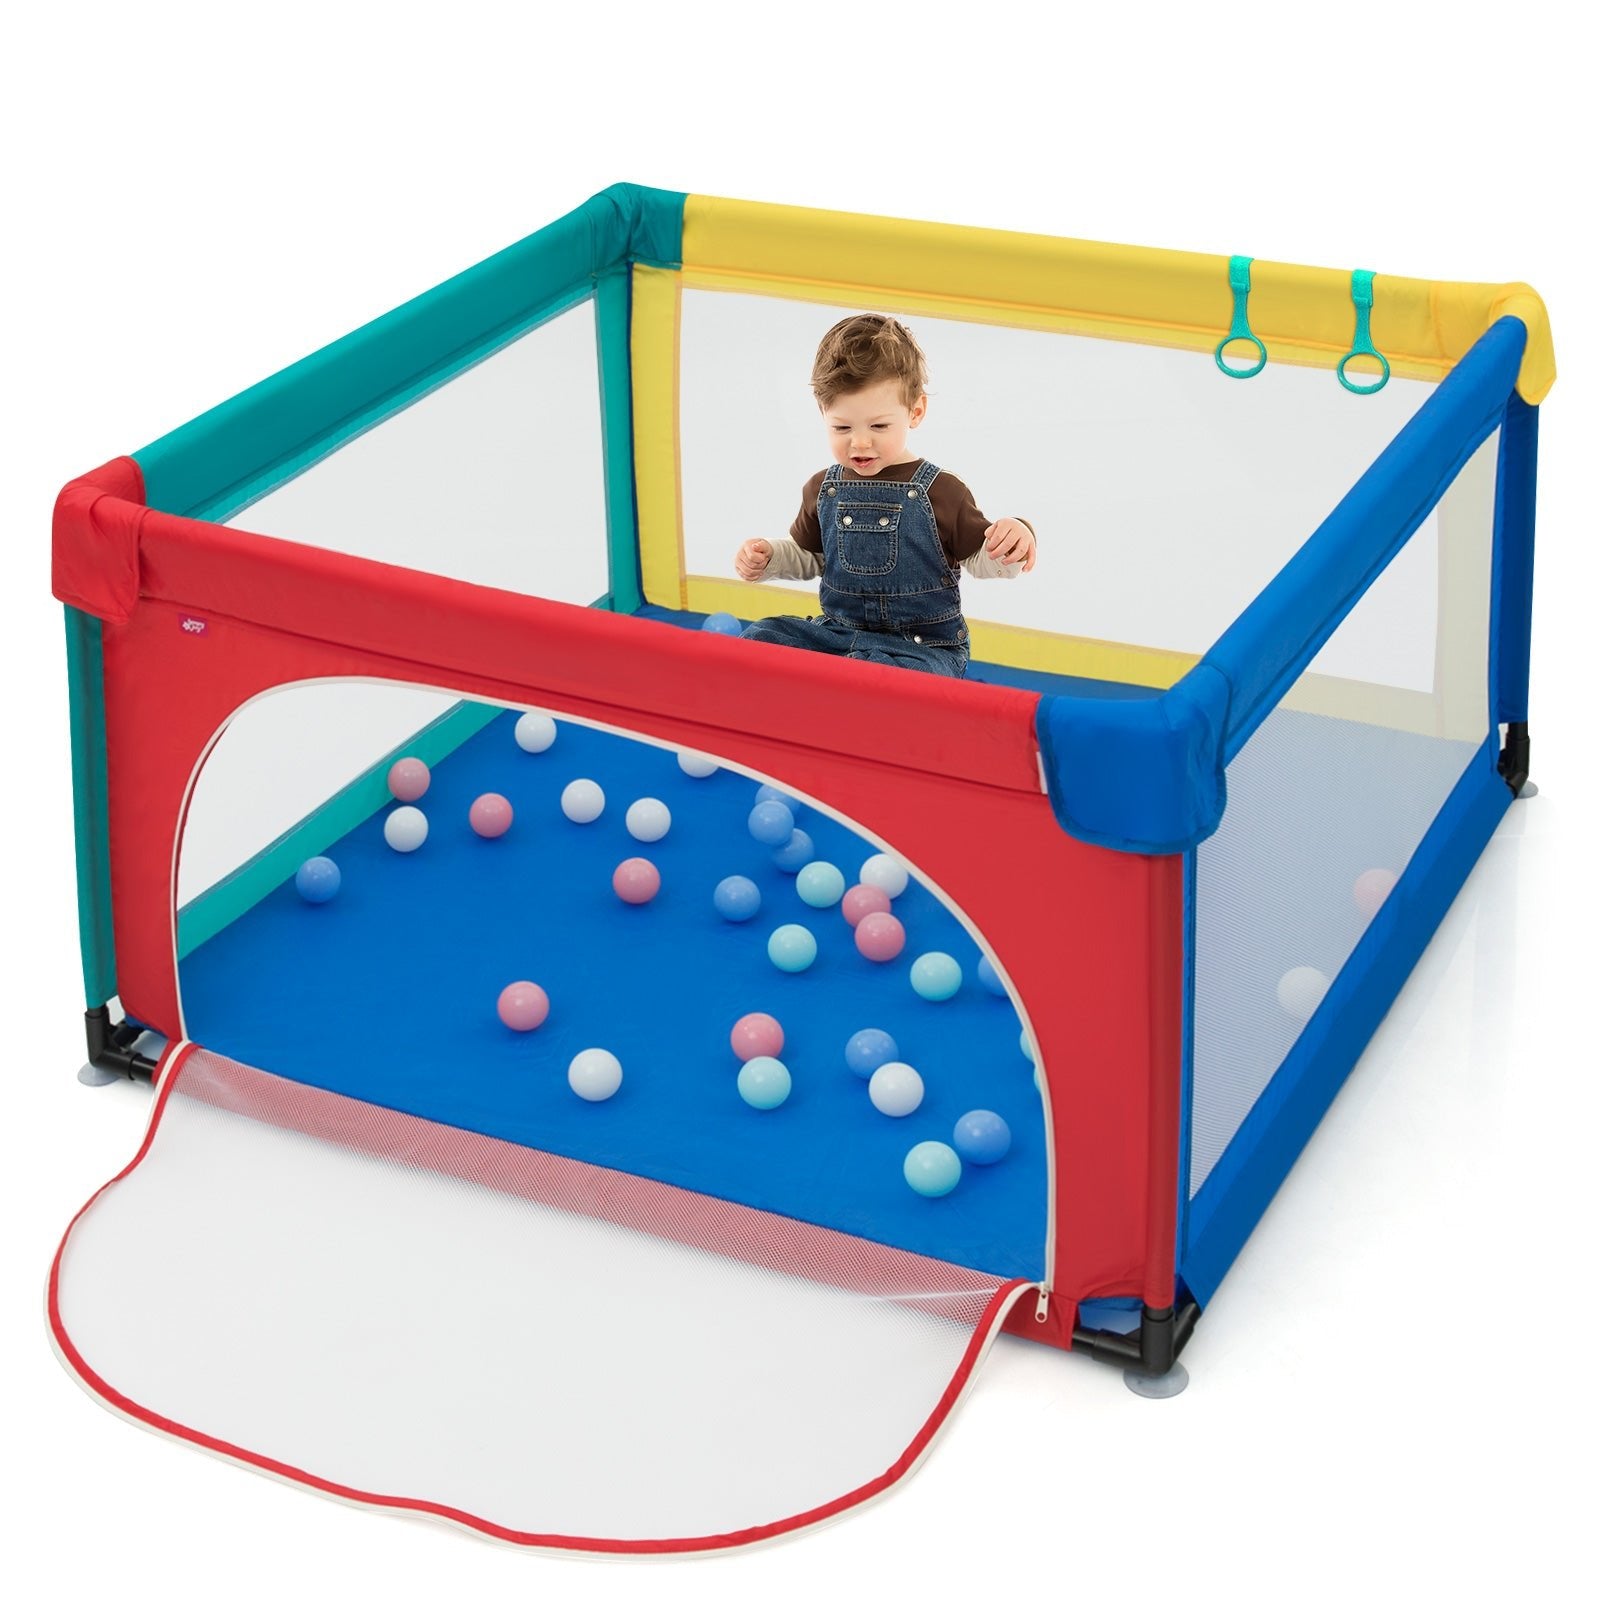 Baby Playpen Safety Activity Fence in Multicolour: Includes 50 Ocean Balls for Toddlers